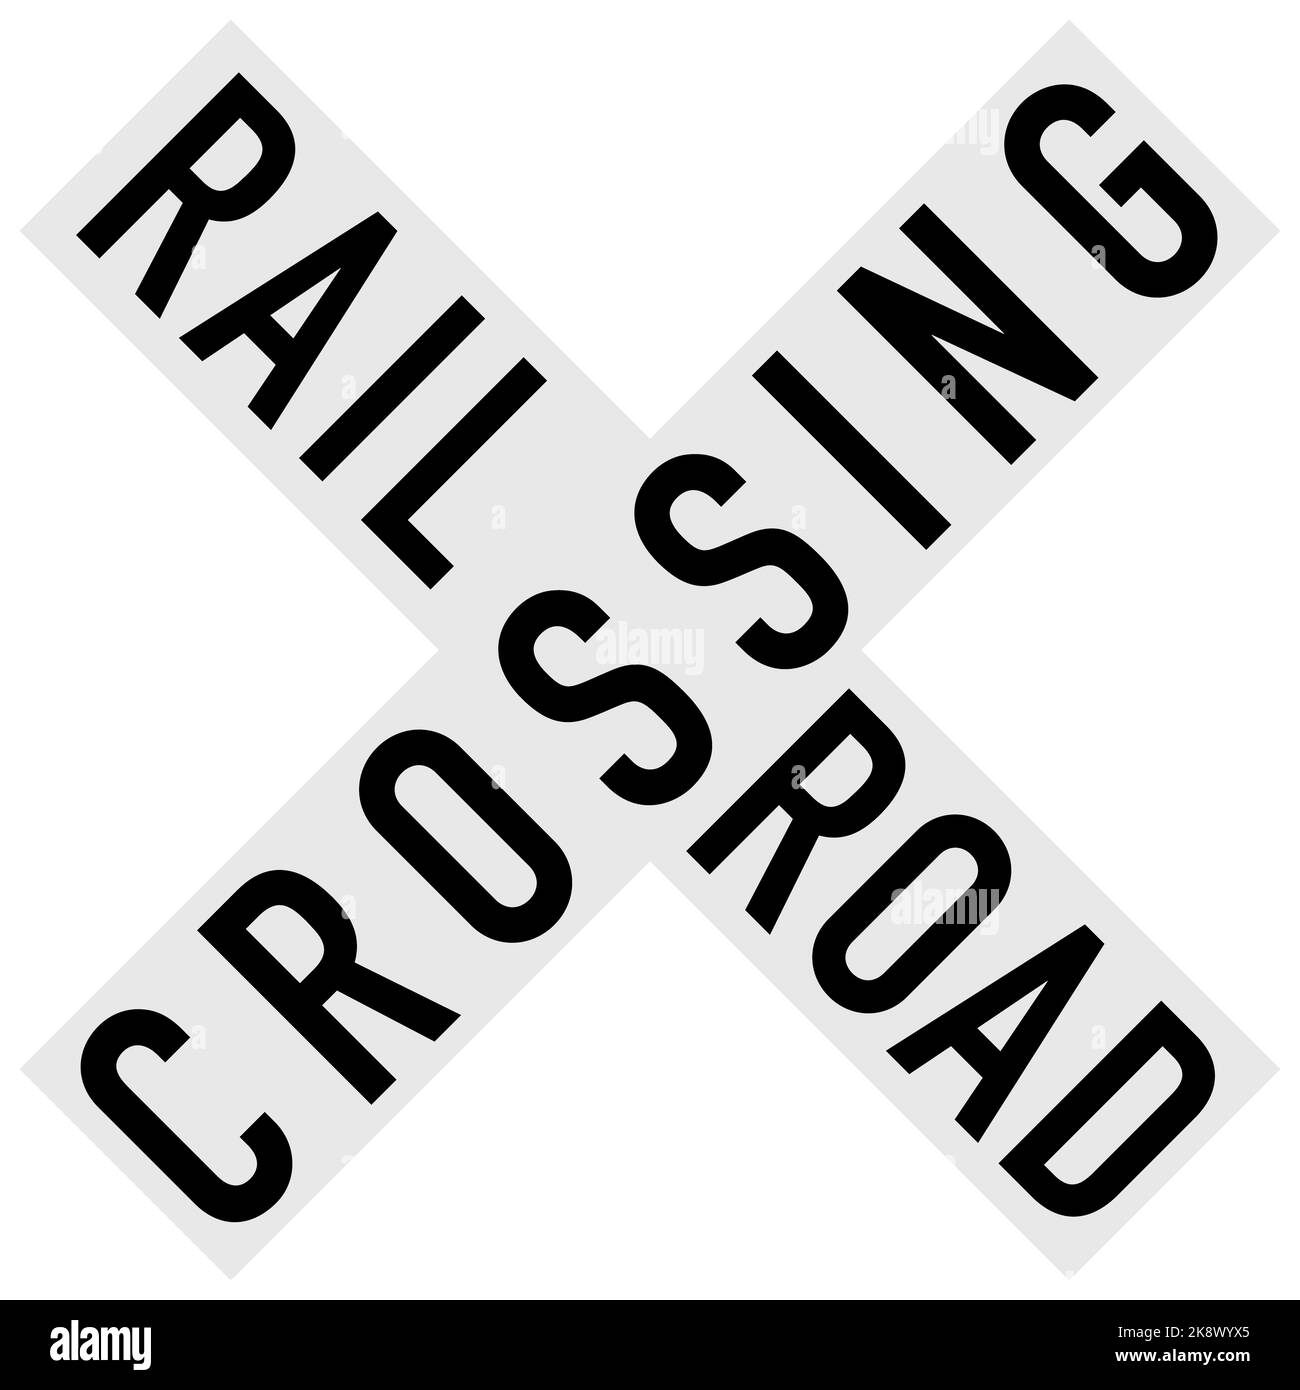 Road sign of train crossing road on white background. Railroad Traffic Sign. flat style. Stock Photo